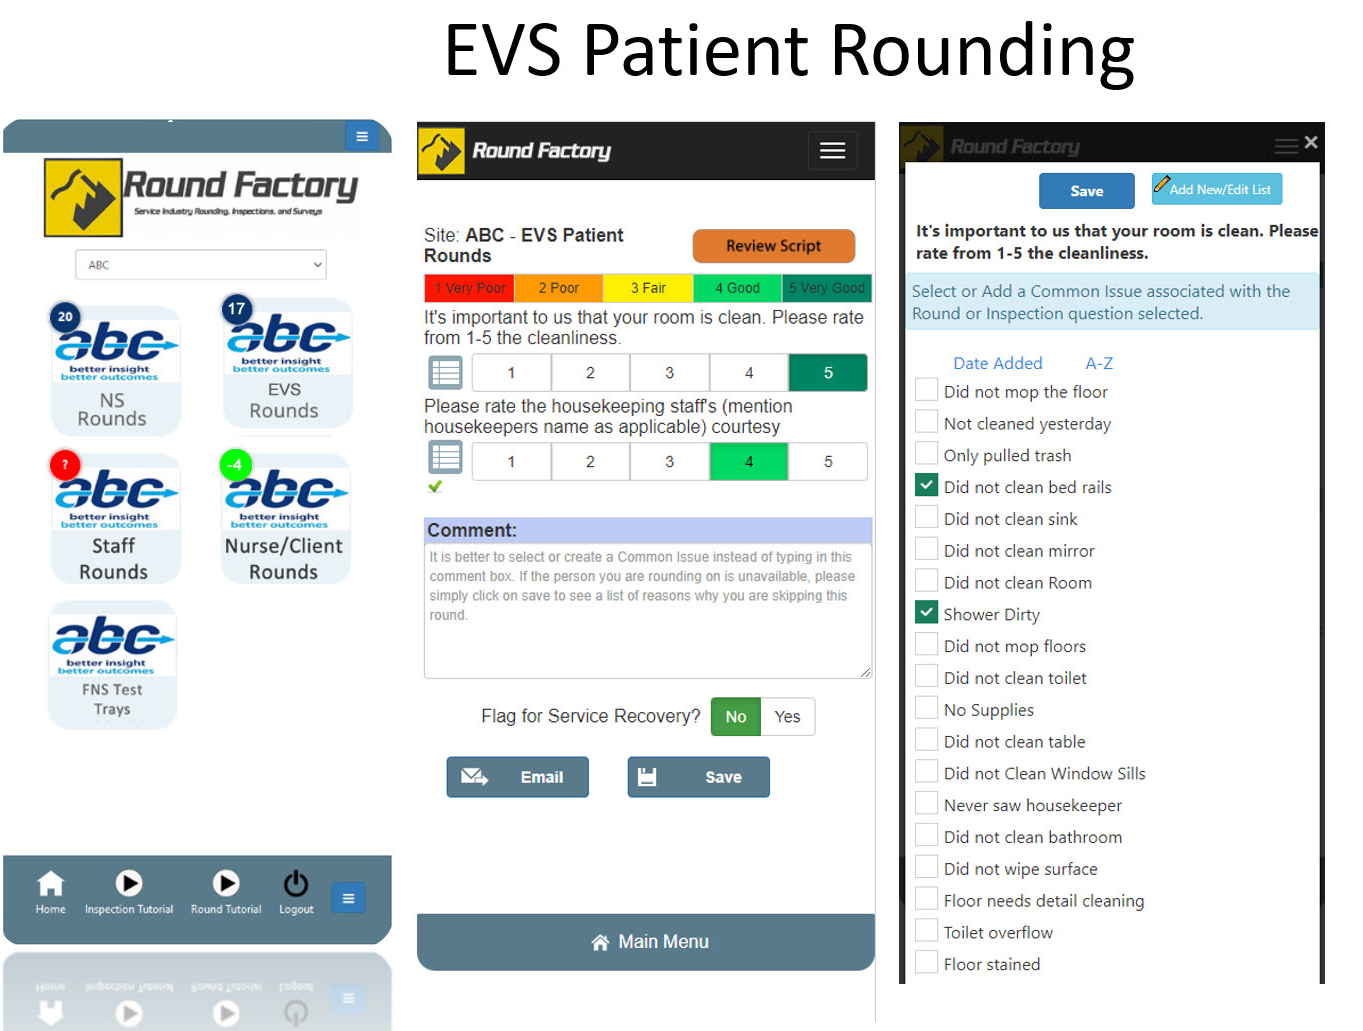 EVS Patient Rounding proven to increase patient satisfaction by 15% once hardwired